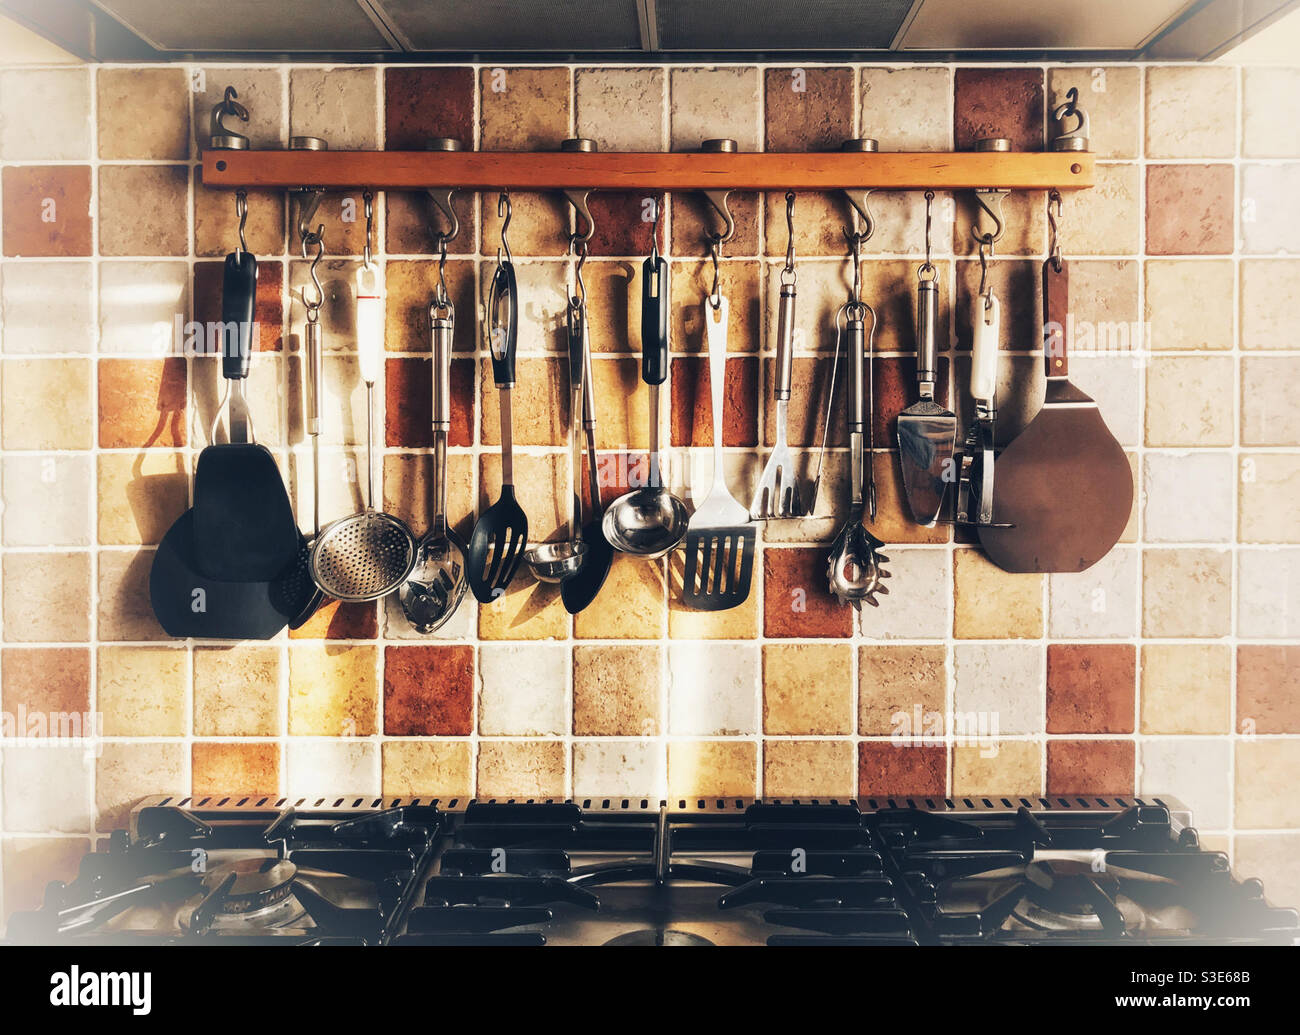 Country-style kitchen with large range cooker top and rack of utensils. Stock Photo